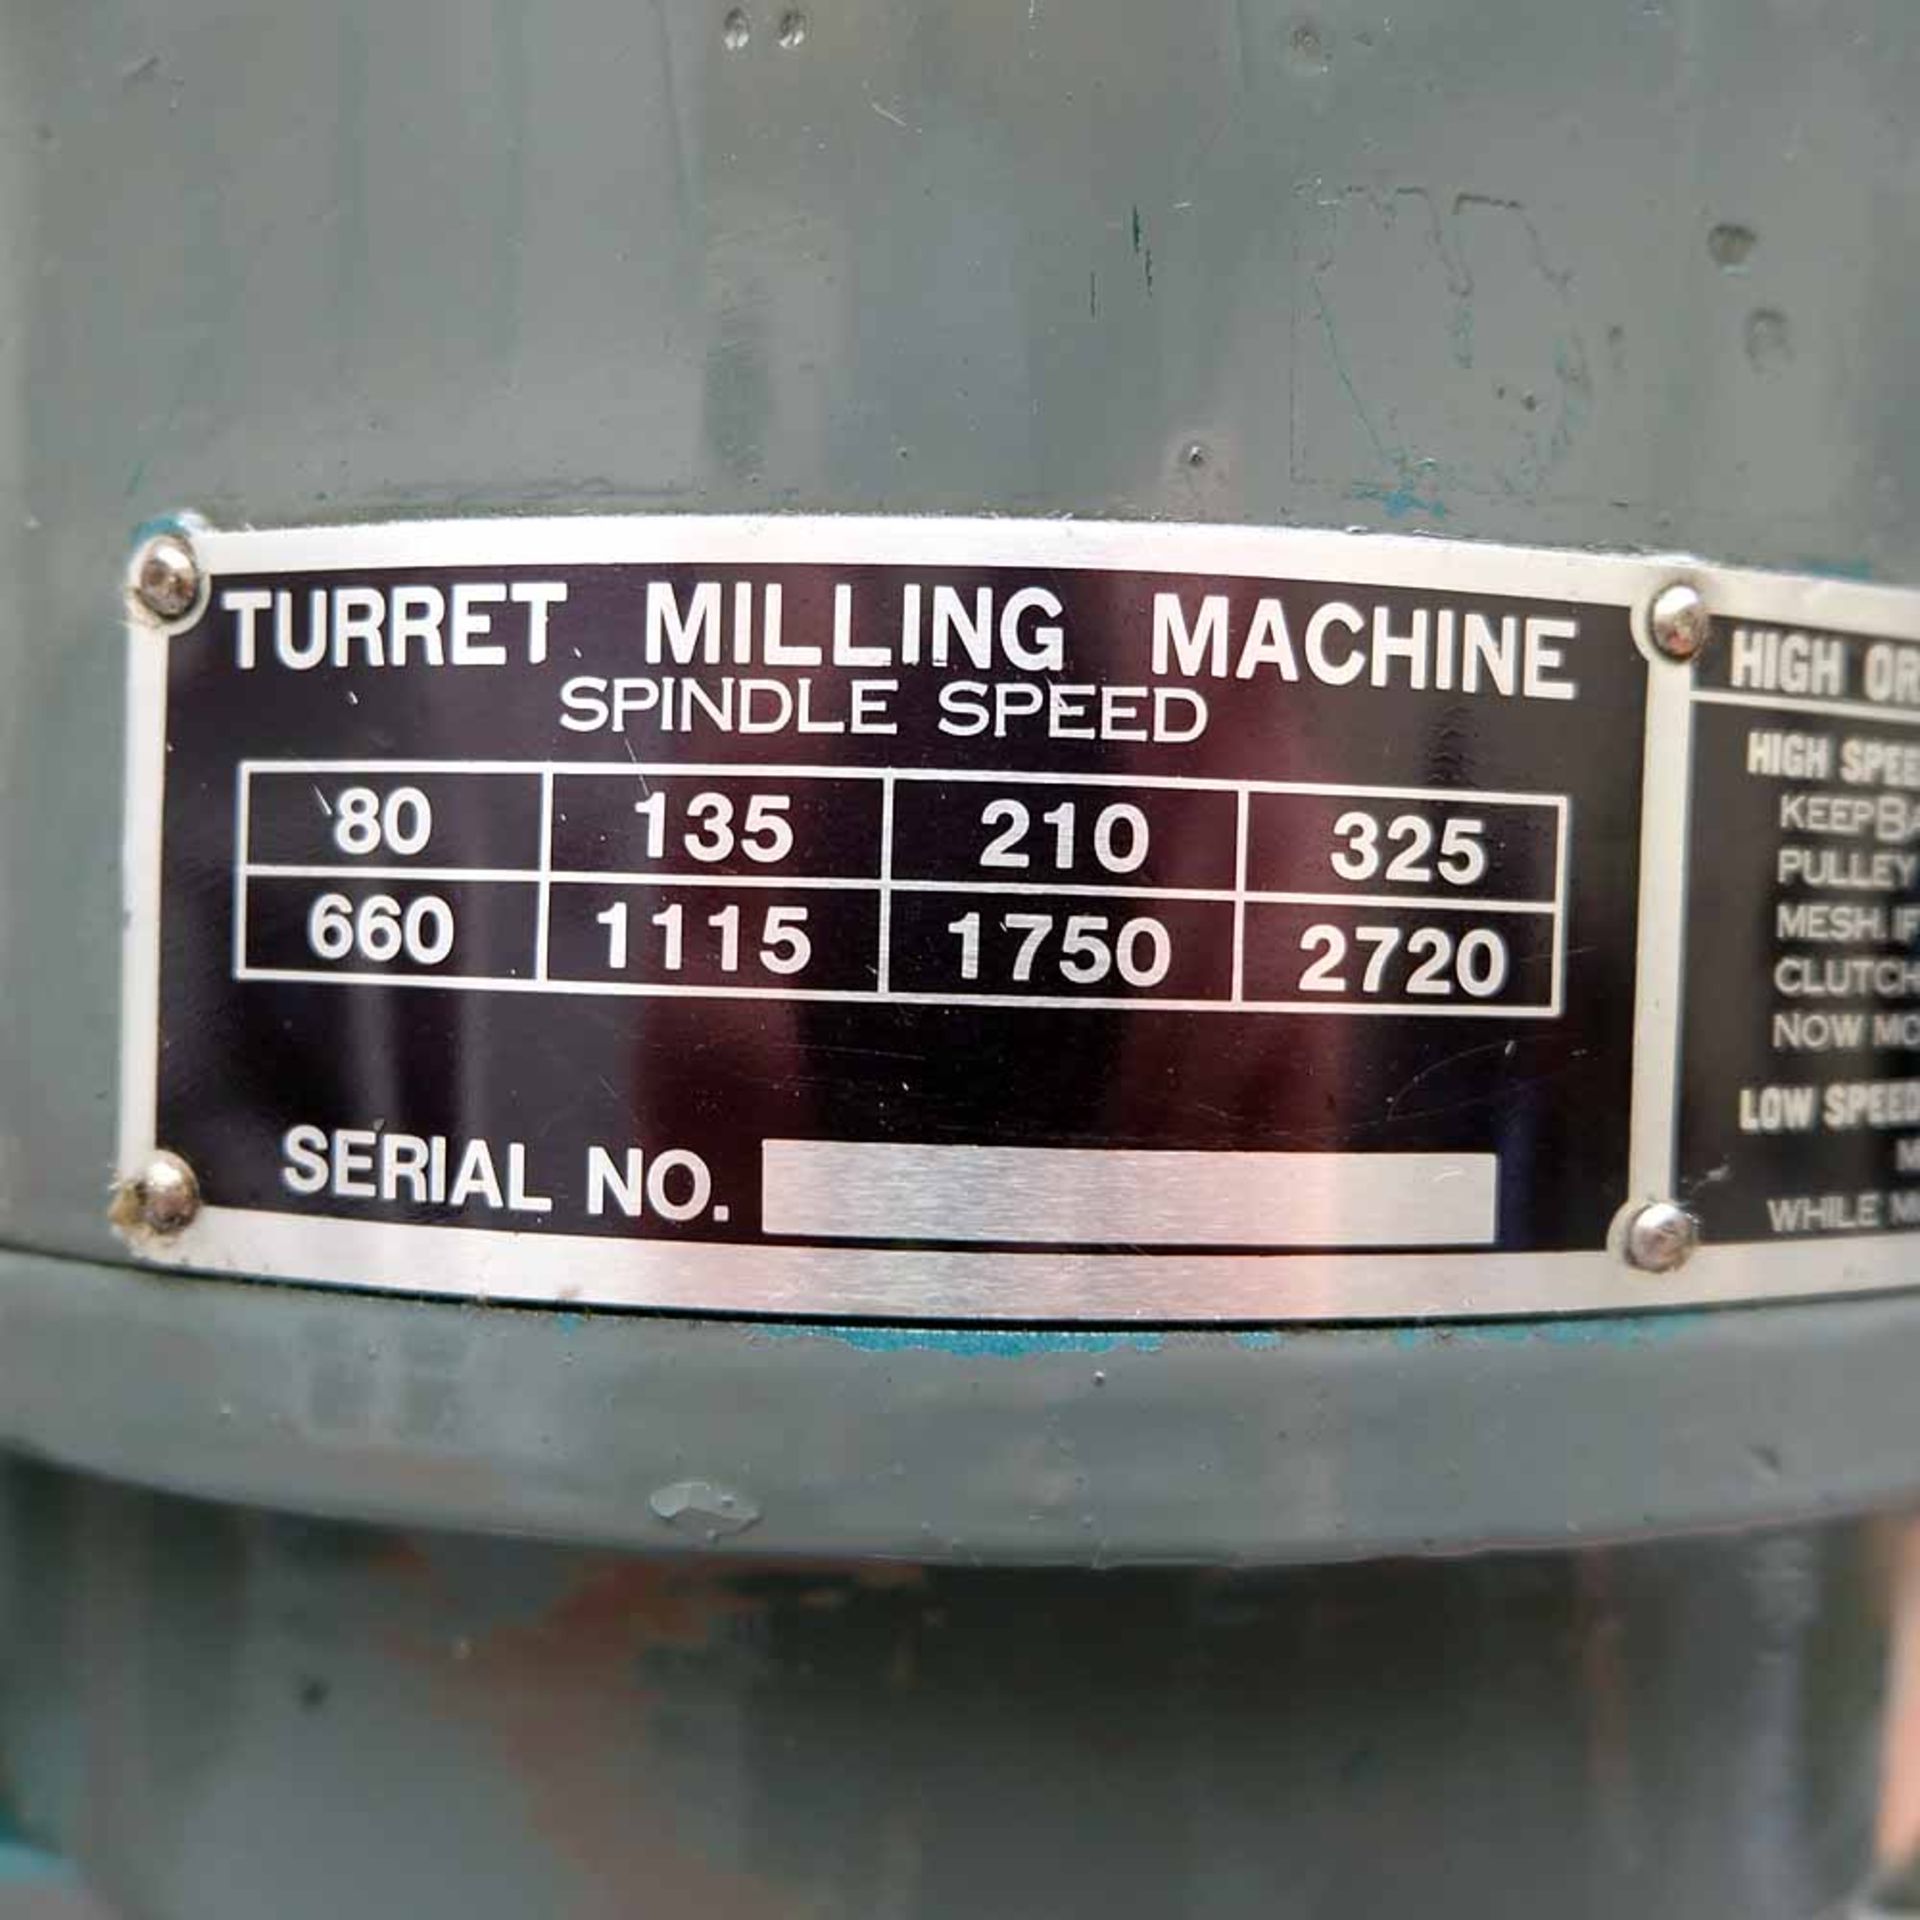 Turret Milling Machine. Model TY9425 - Image 5 of 13